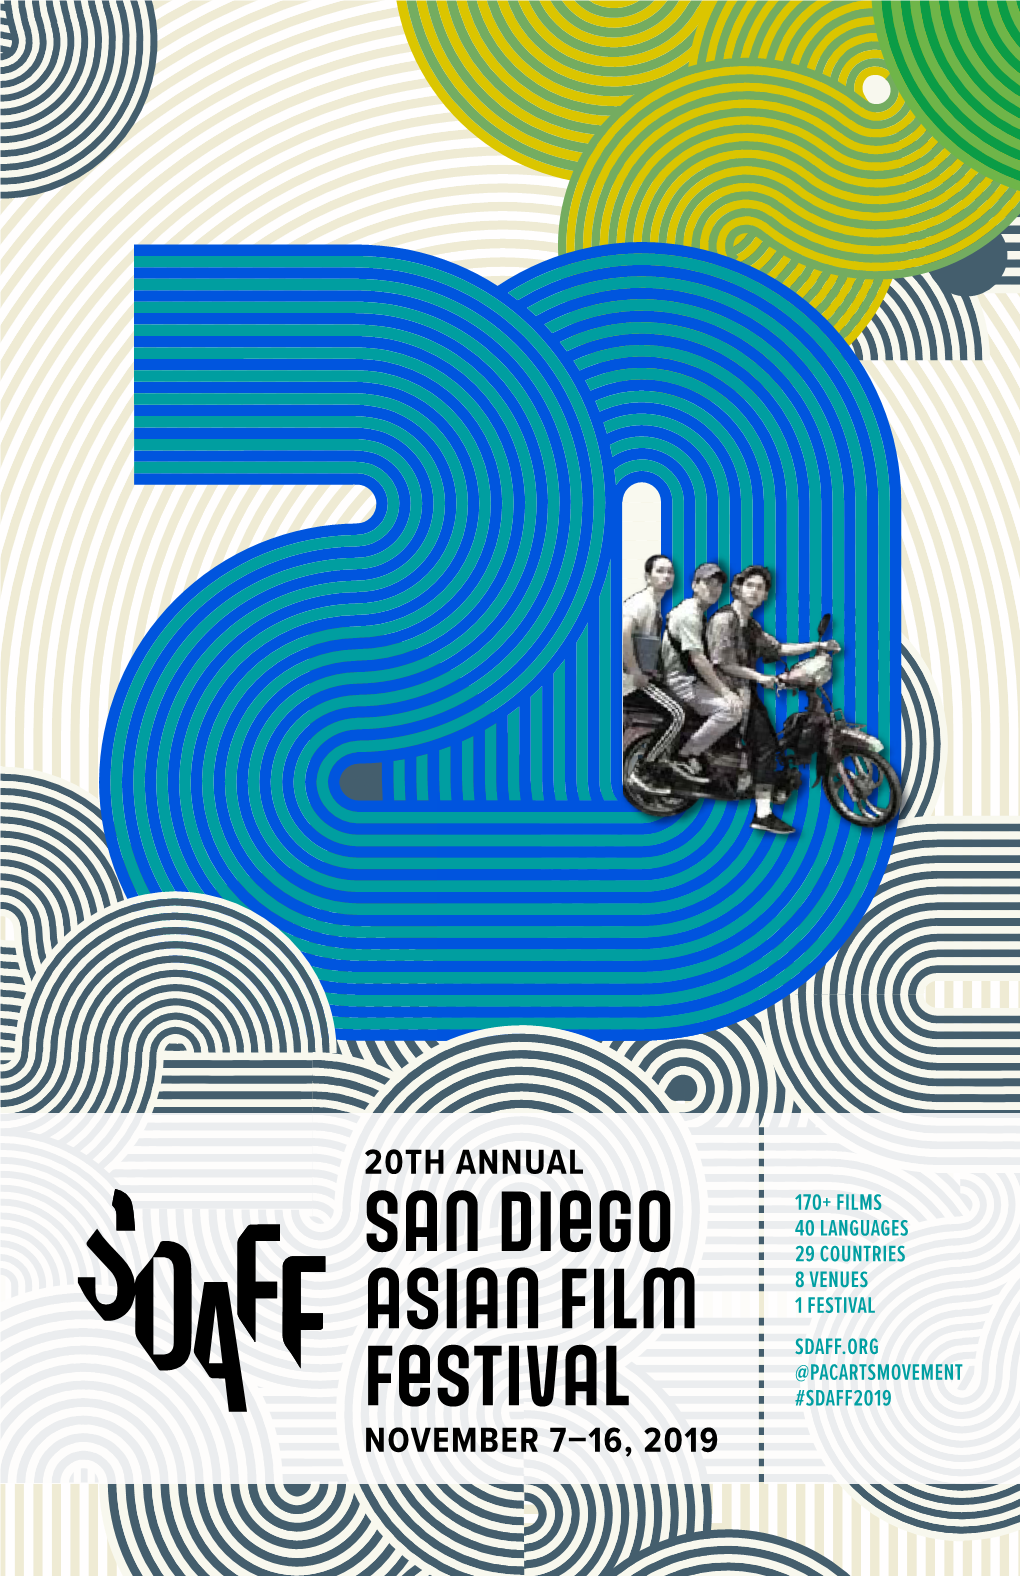 SAN DIEGO ASIAN FILM FESTIVAL 2019 Parties & Special Events